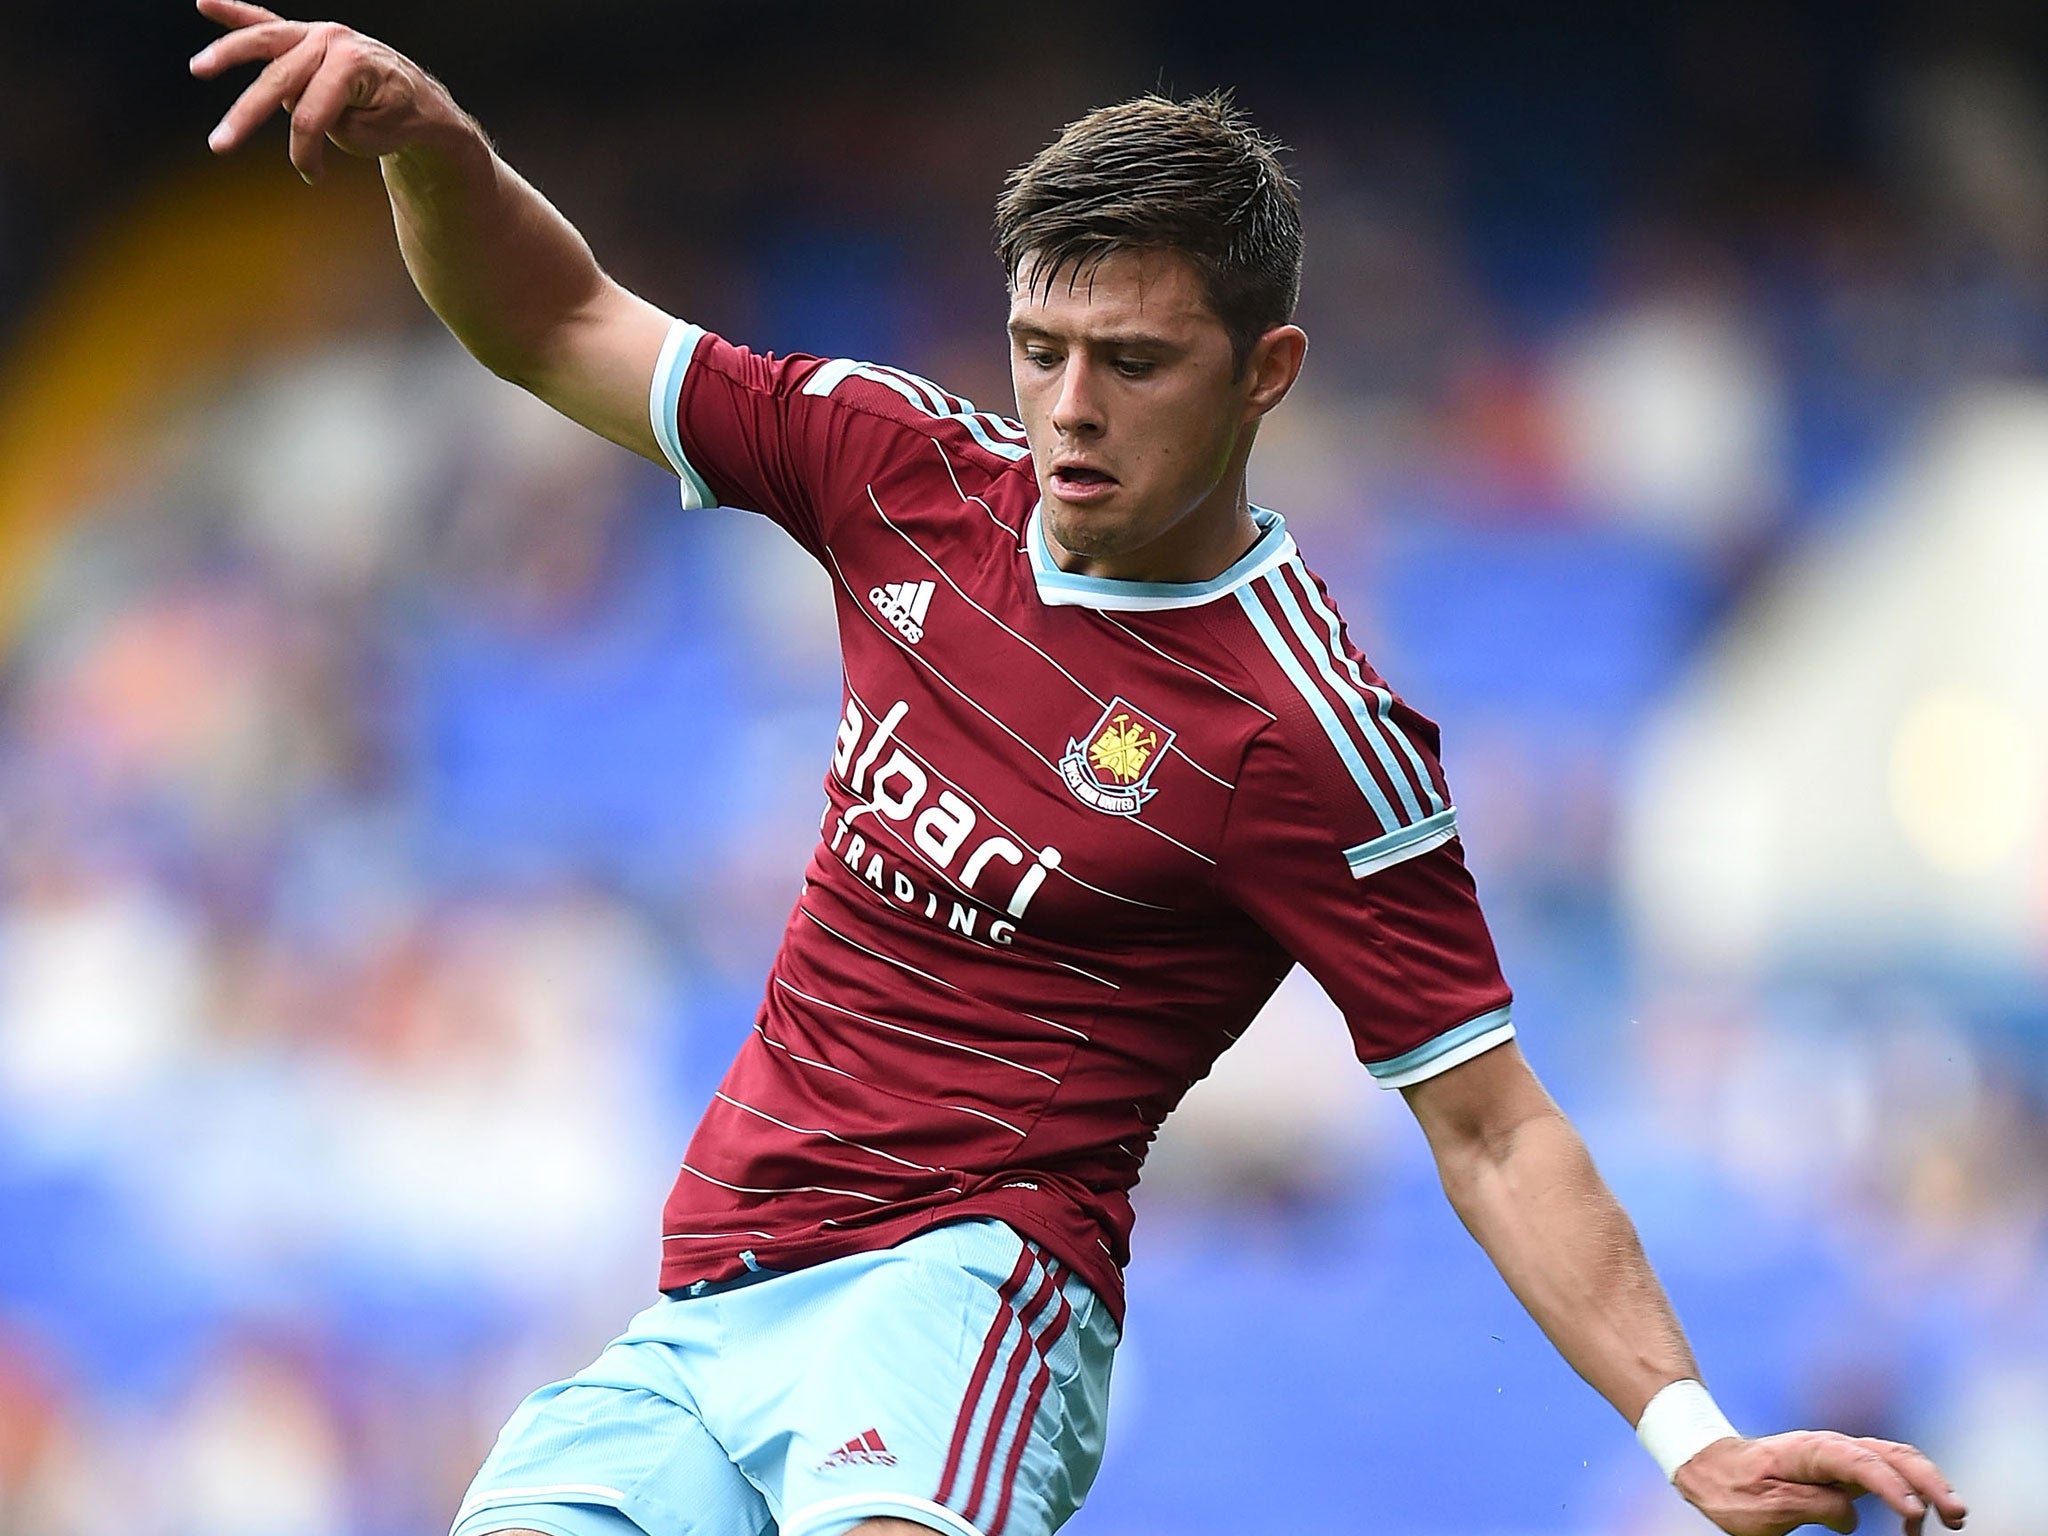 Aaron Cresswell was an apprentice at Anfield until the age of 15 before being released by then manager Gérard Houllier